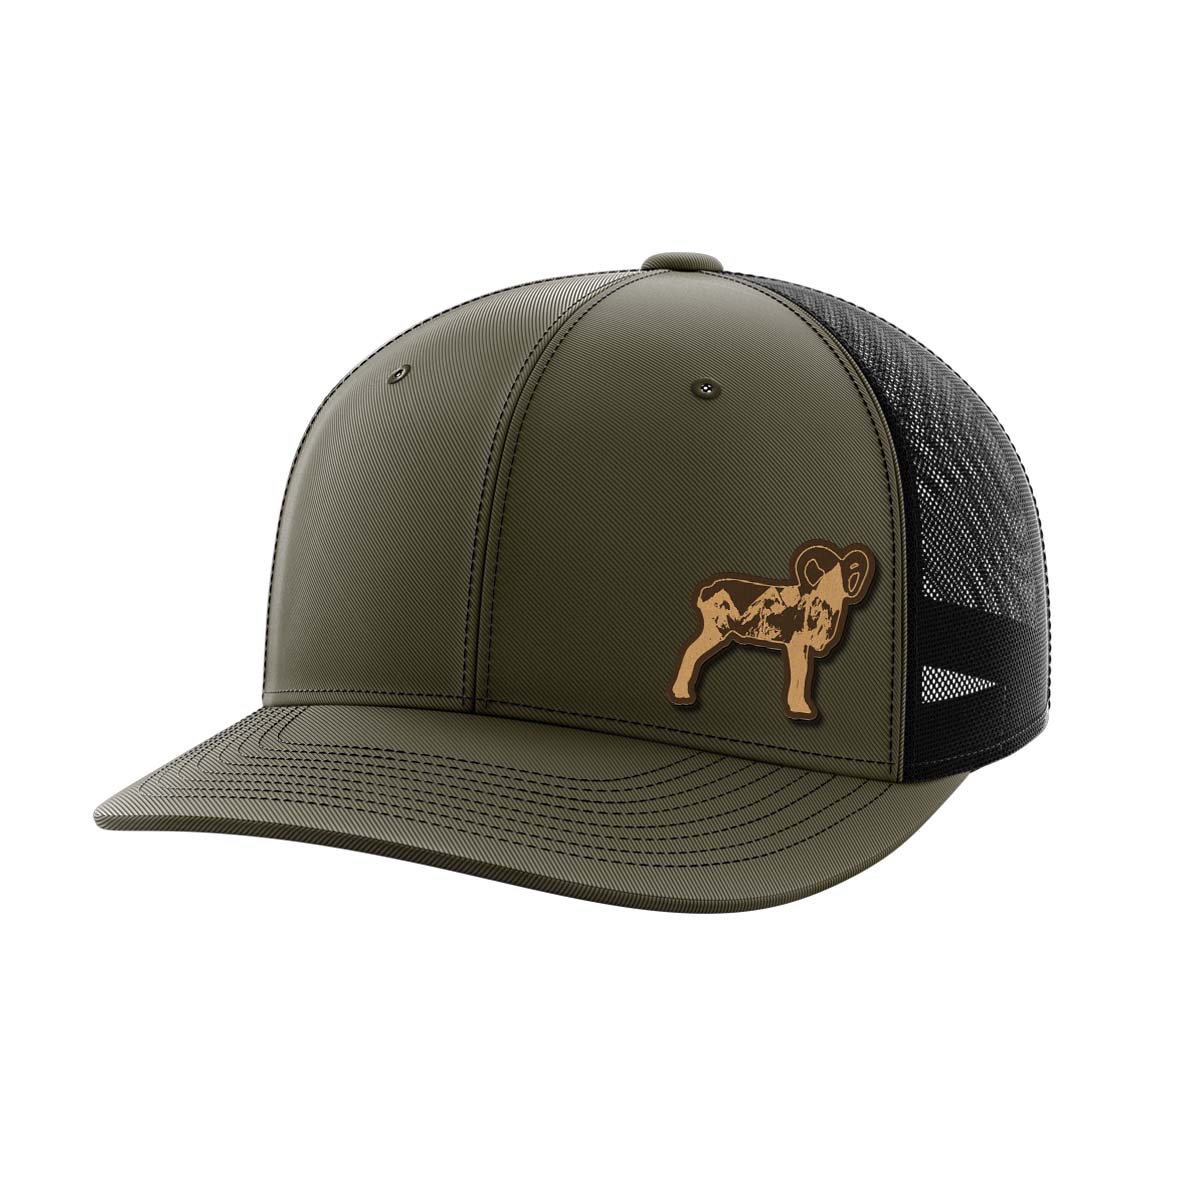 Ram Leather Patch Hat - Greater Half